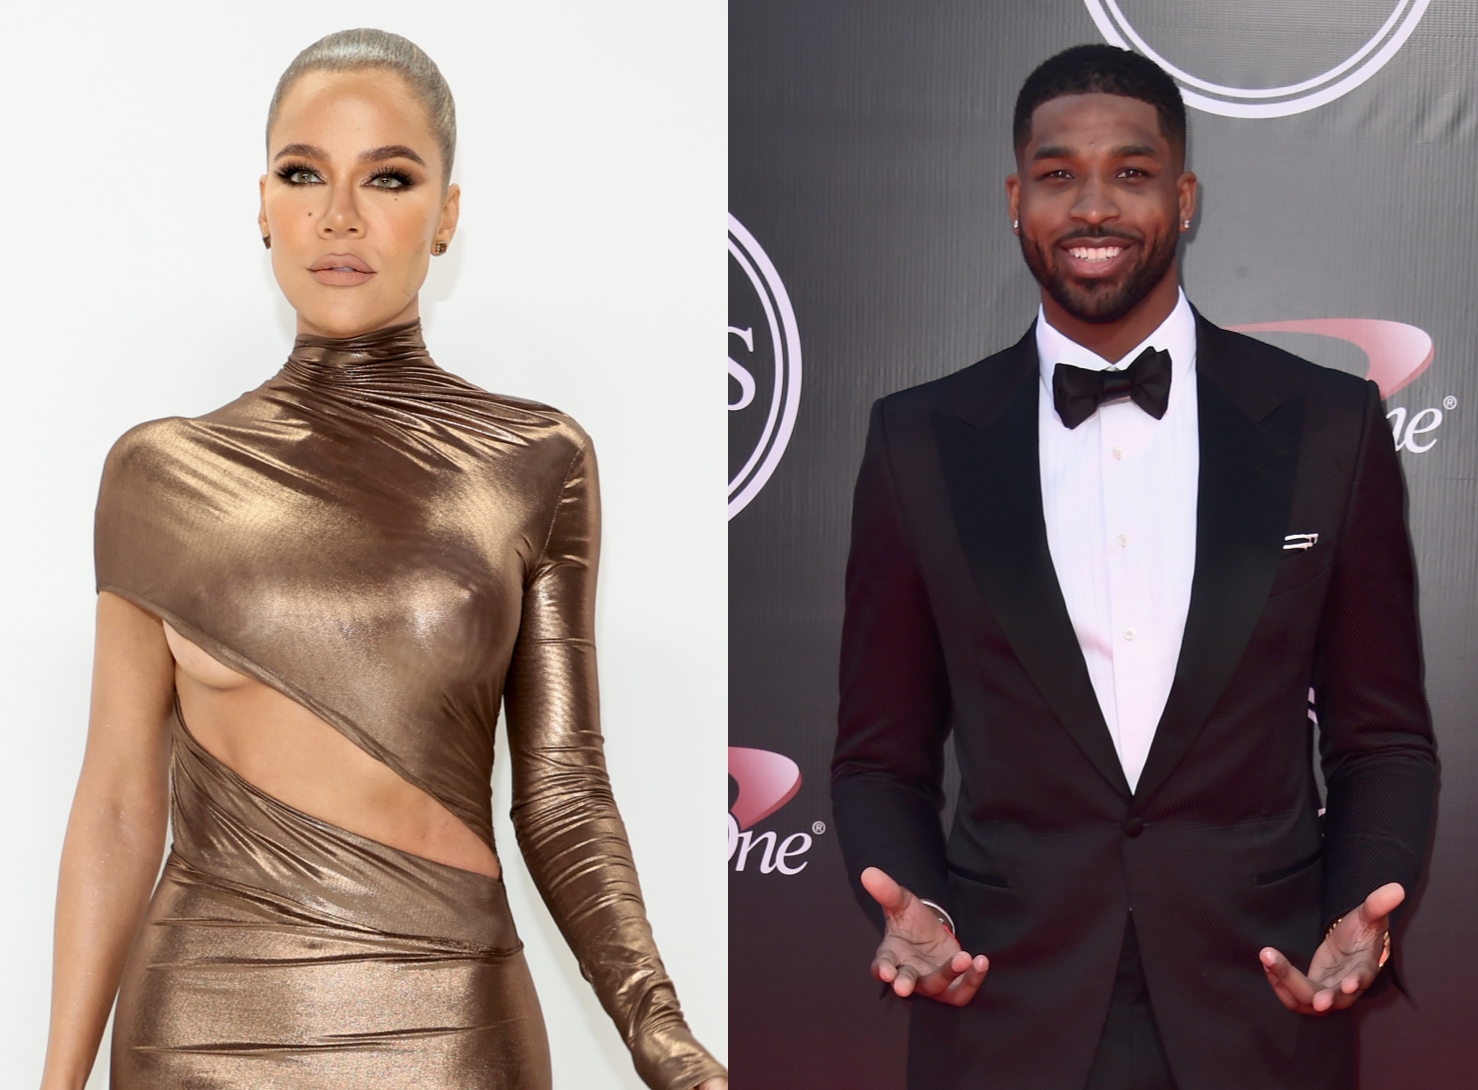 Khloe Kardashian Reveals Ex Tristan Thompson And His Brother Moved In